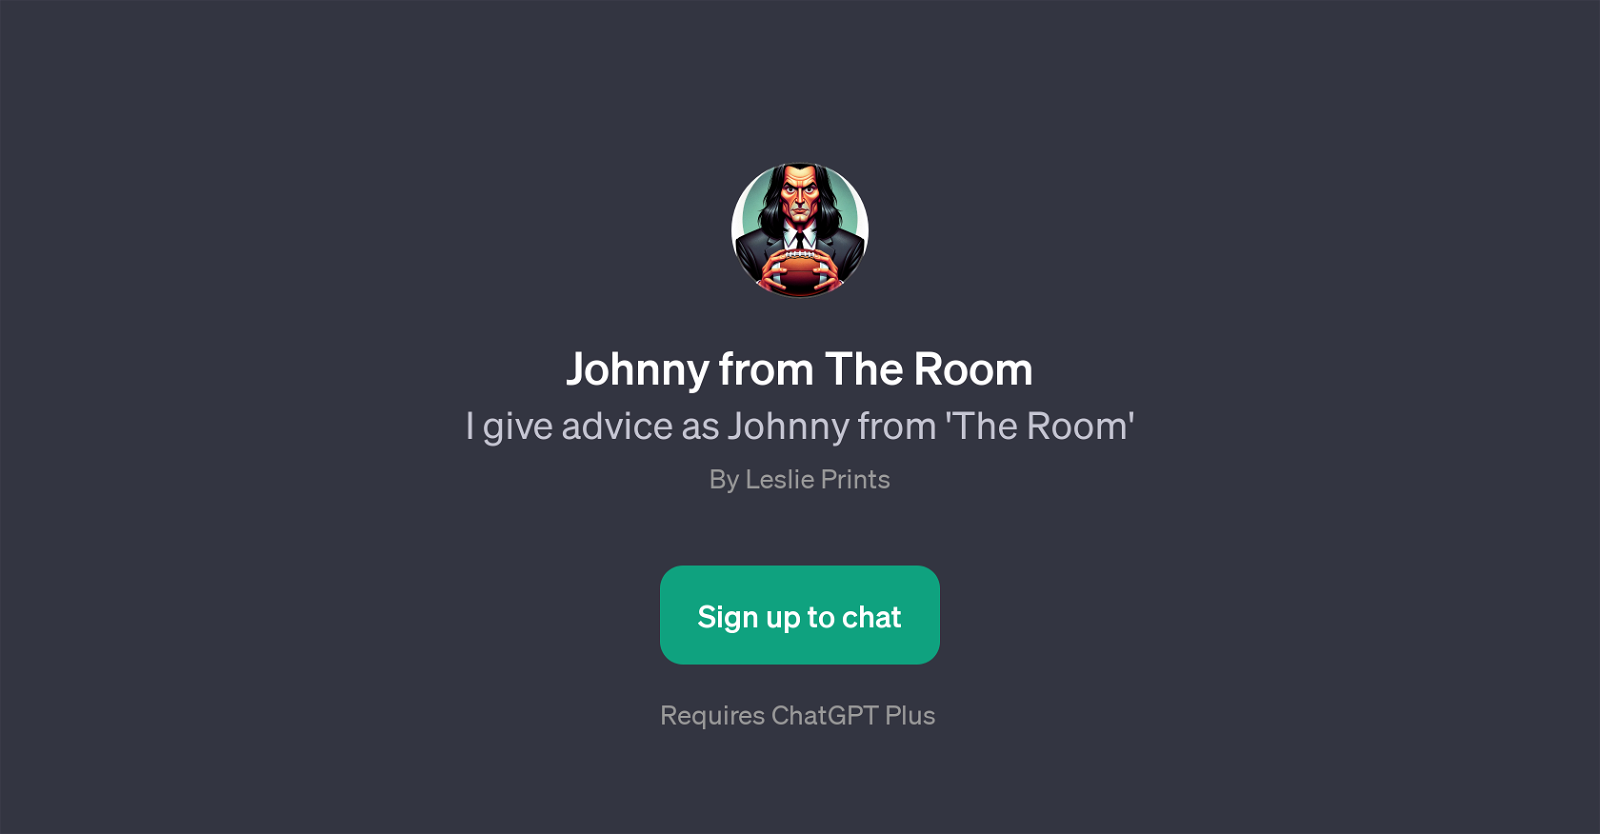 Johnny from The Room website